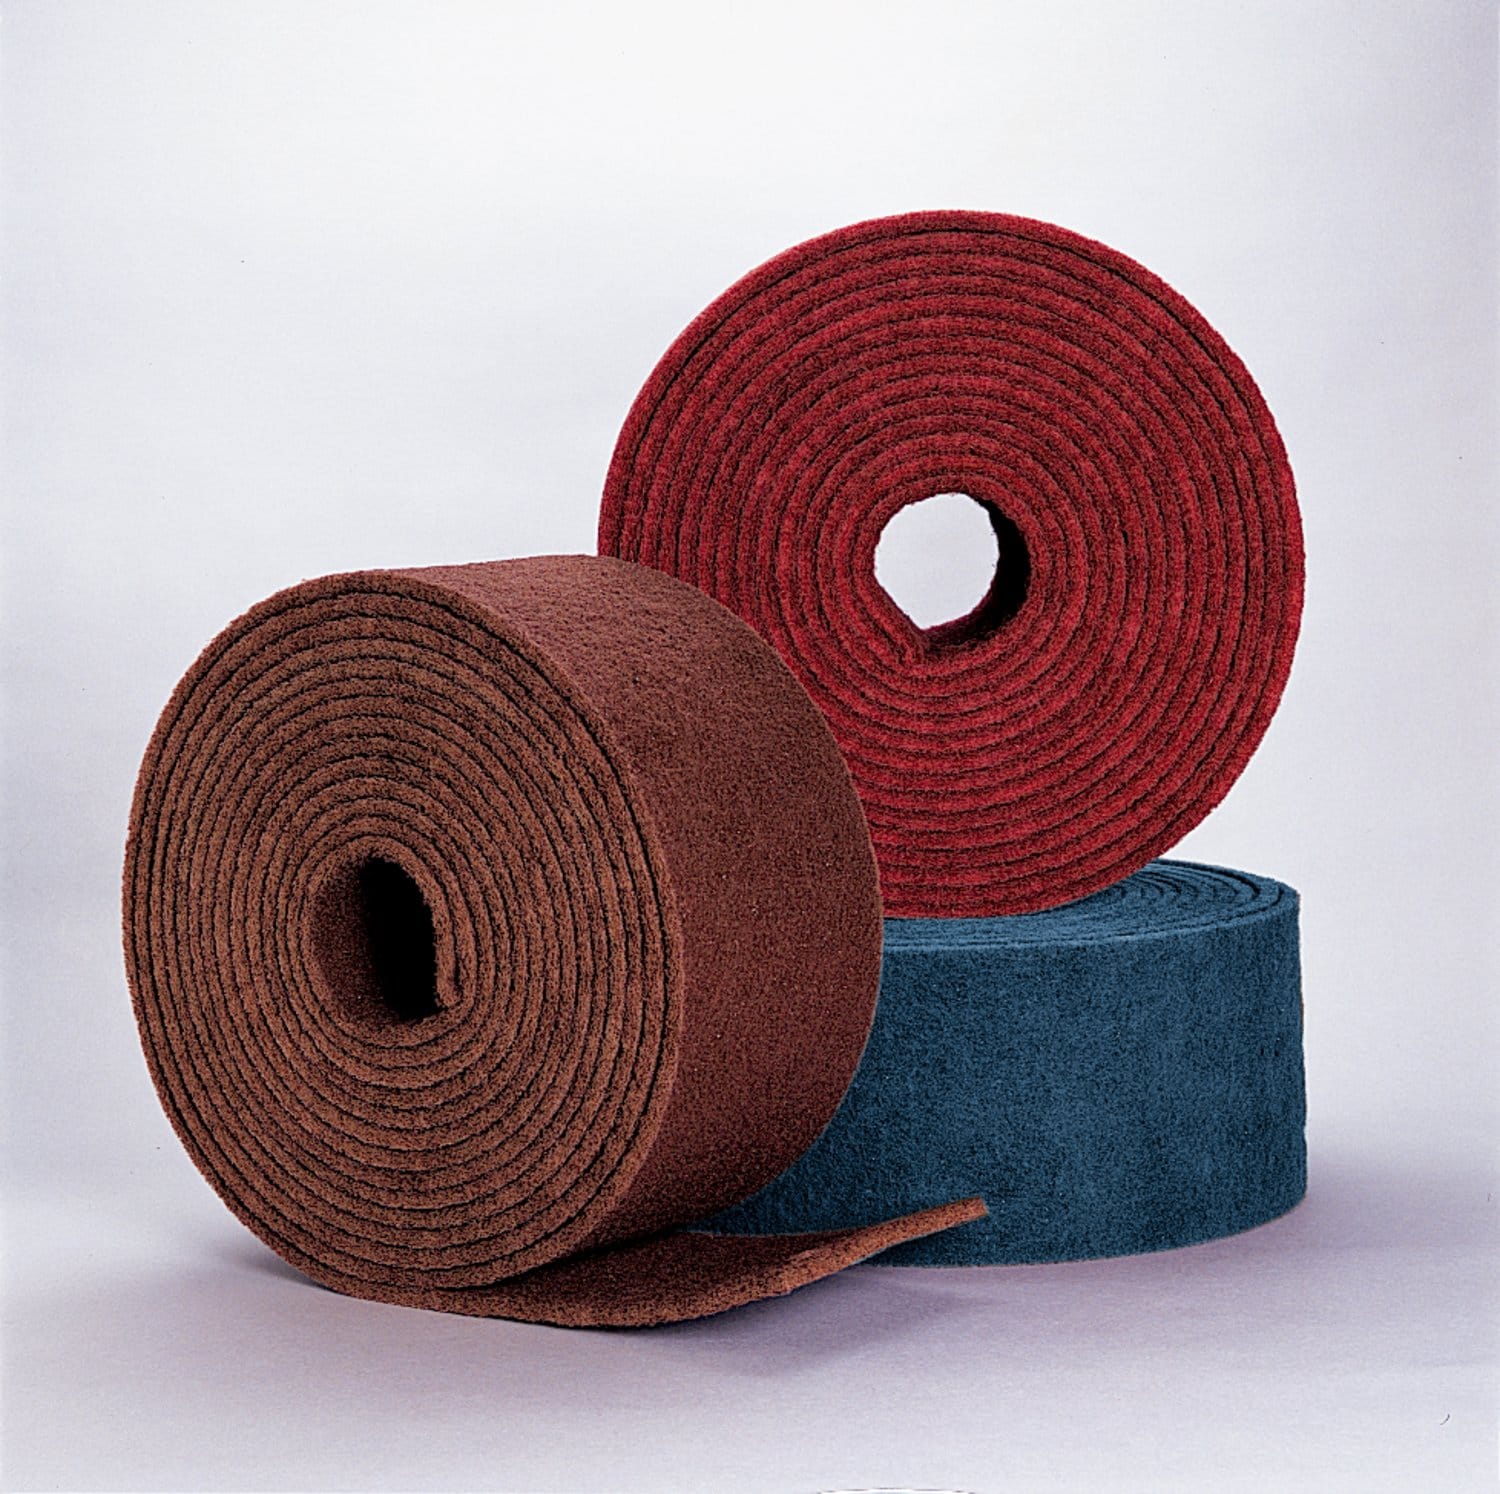 7010330678 - Standard Abrasives Surface Conditioning FE Roll 830029, 12-1/2 in x 25
yd VFN, 1 ea/Case